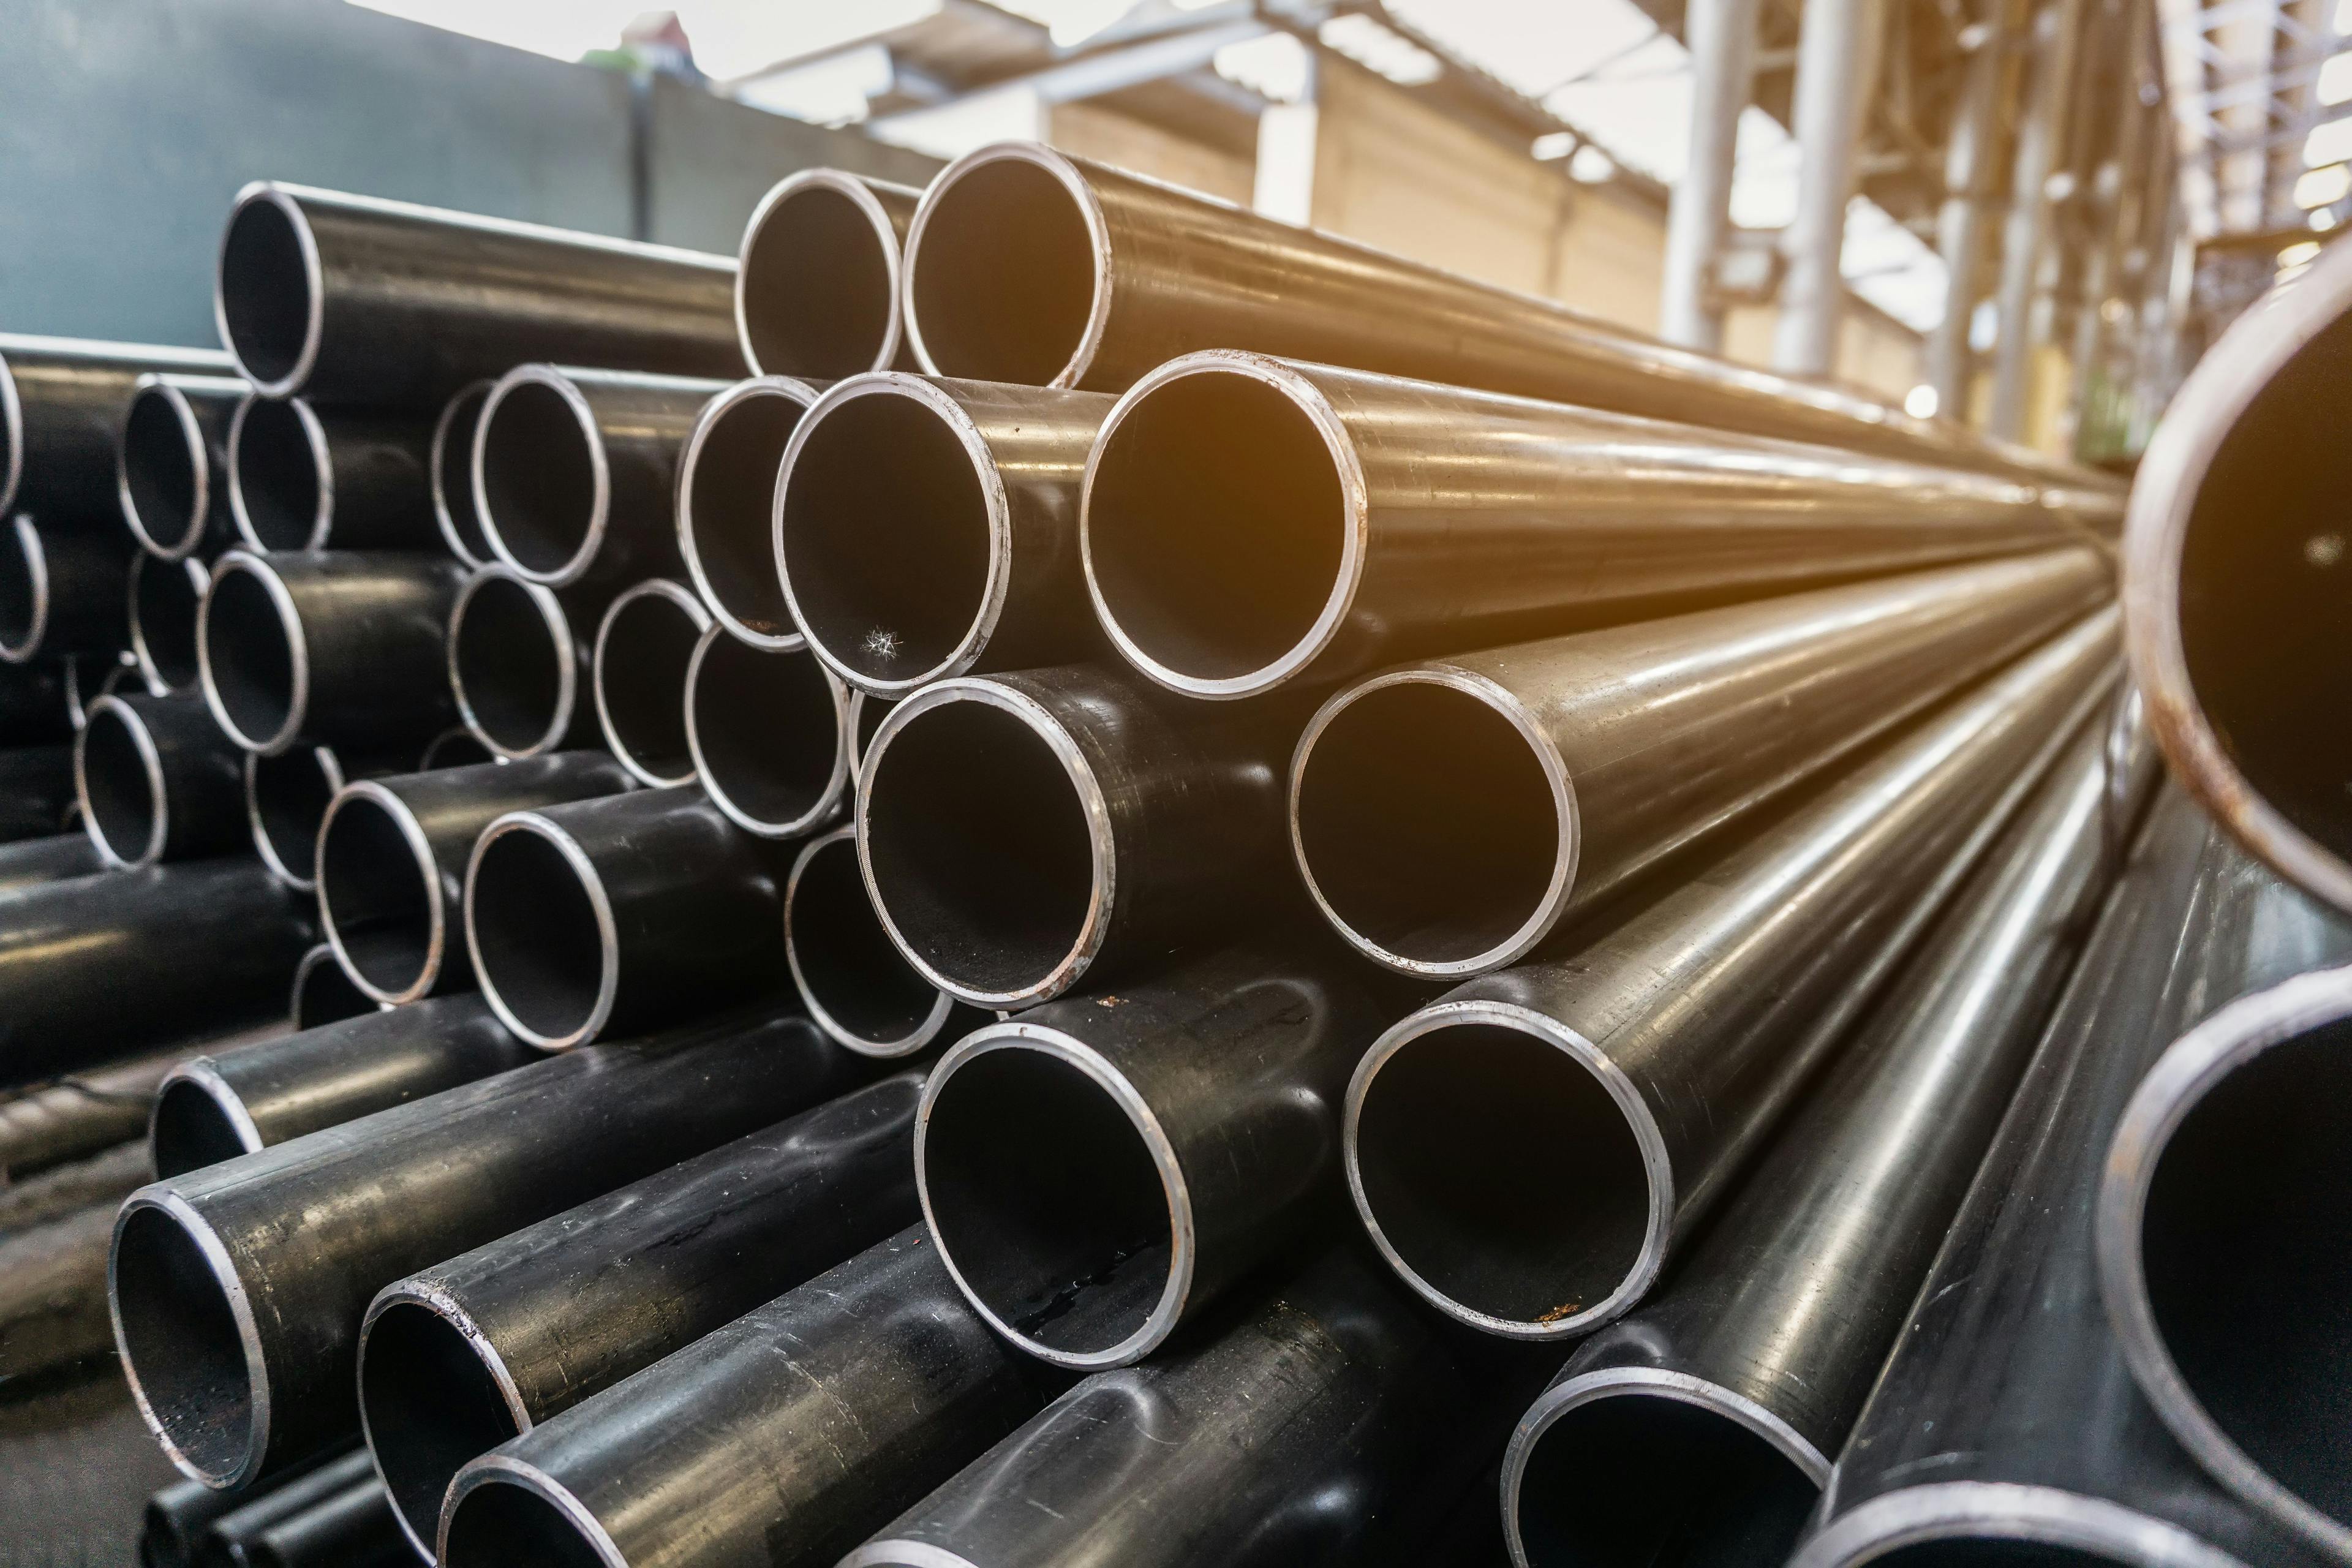 high quality Galvanized steel pipe or Aluminum and chrome stainless pipes in stack waiting for shipment in warehouse | Image Credit: © kasarp - stock.adobe.com.